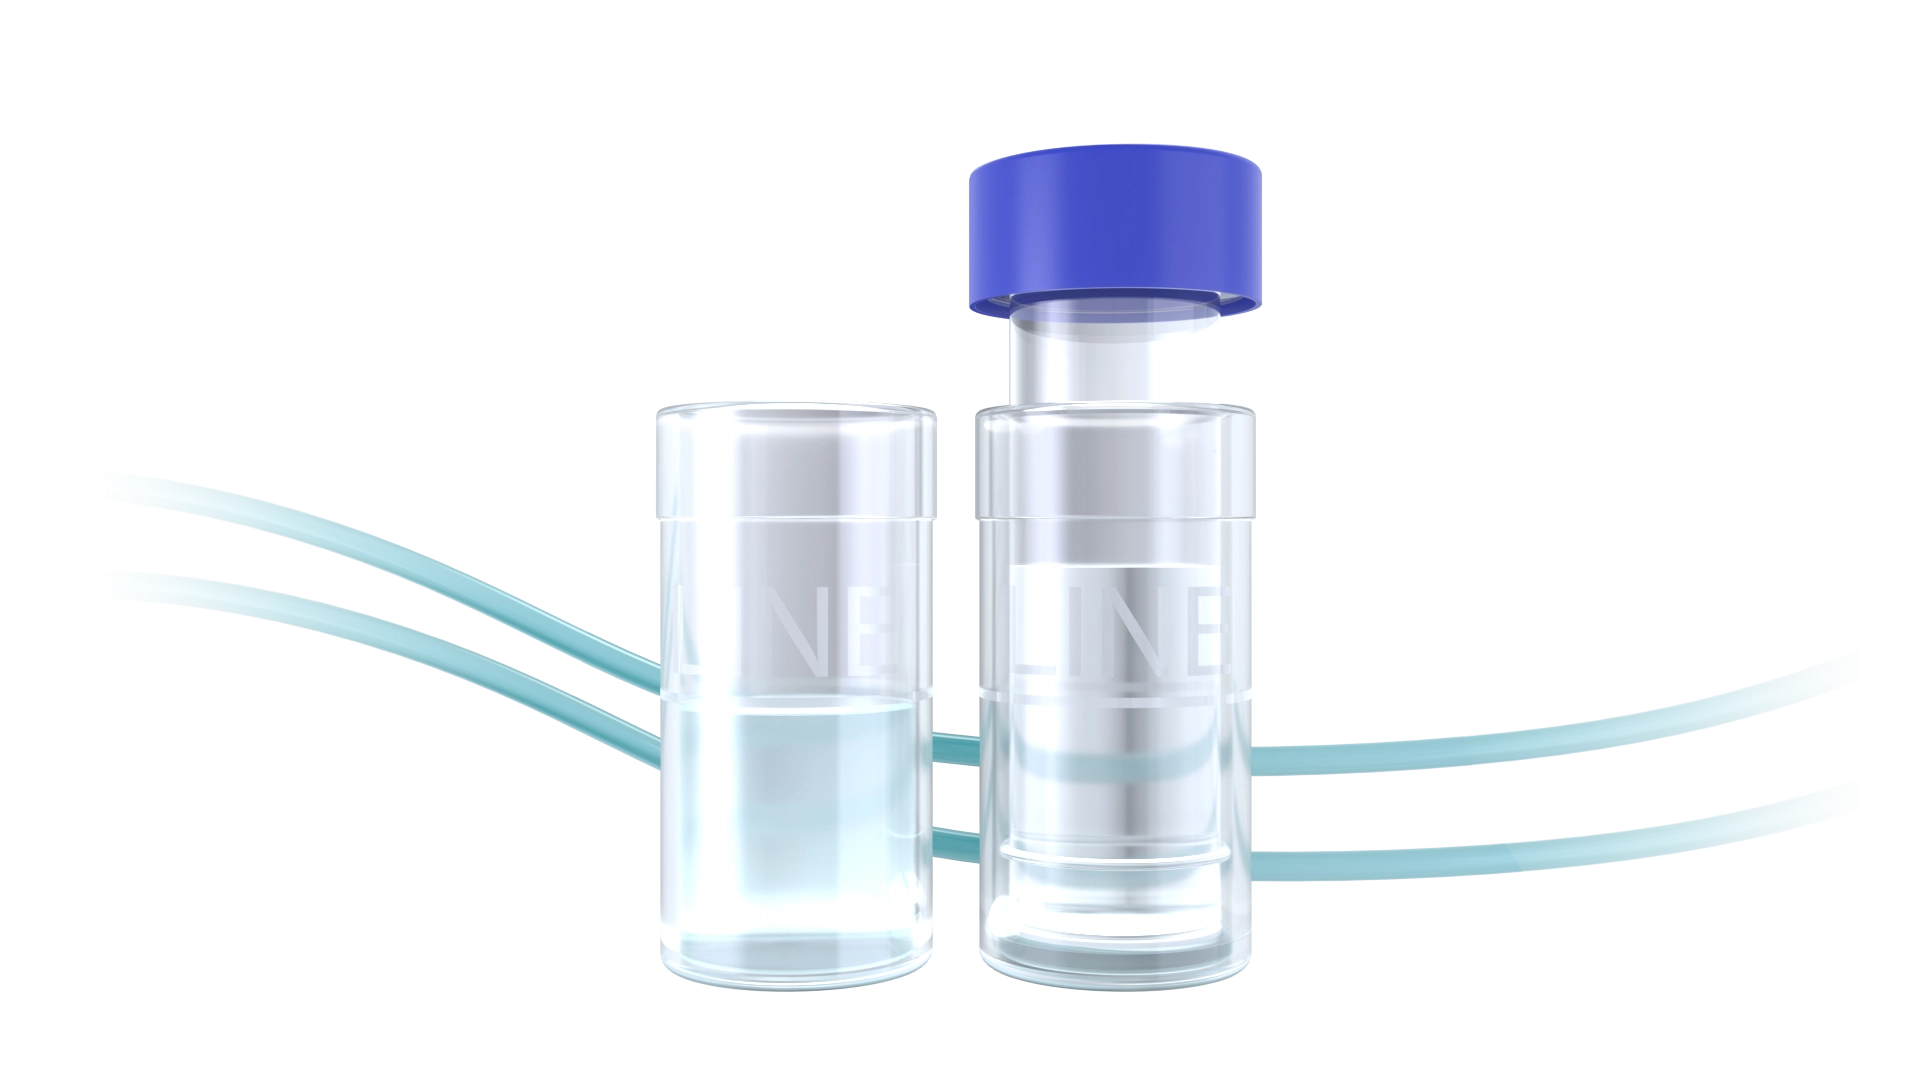 Verex Filter Vials for Filtration and Analysis